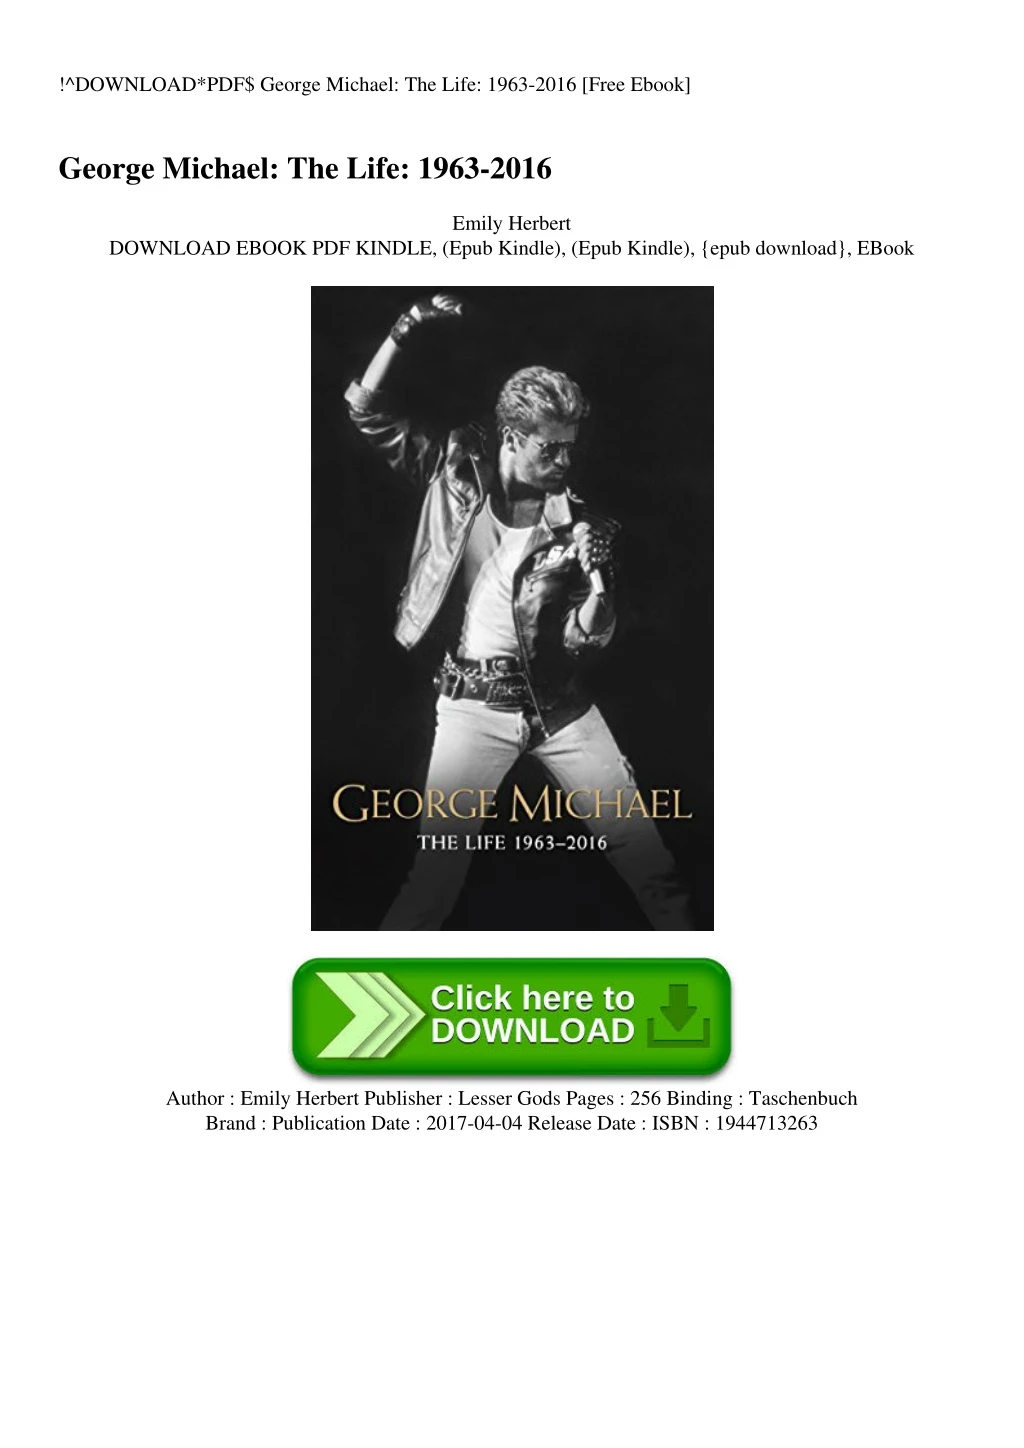 download pdf george michael the life 1963 2016